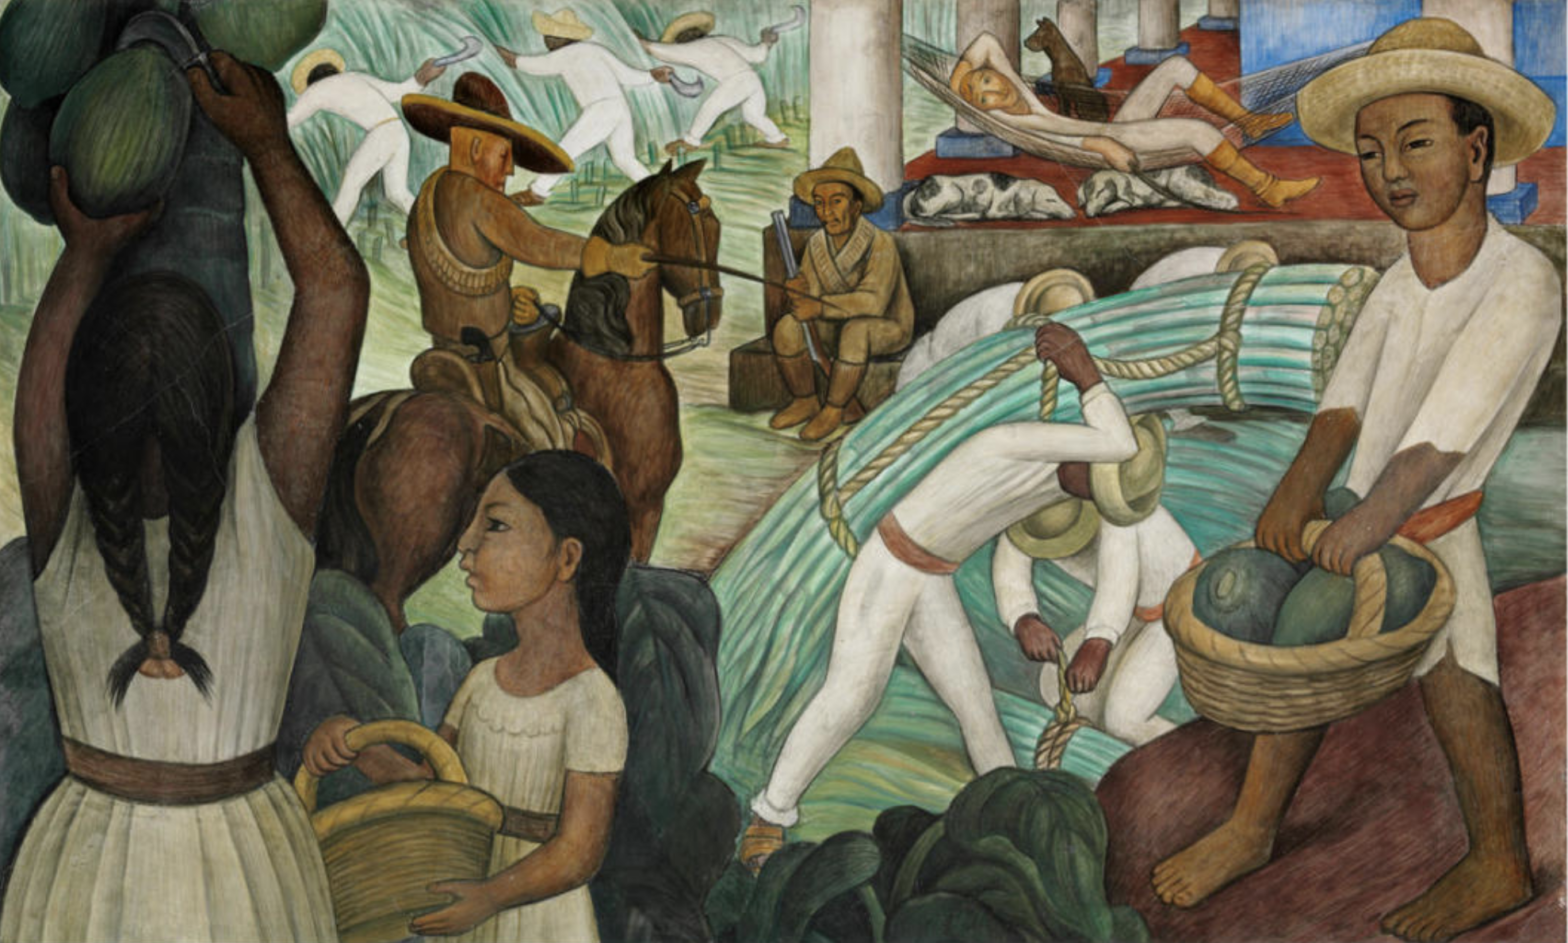 Painting of Native Americans making chocolate under Spanish colonial rule.